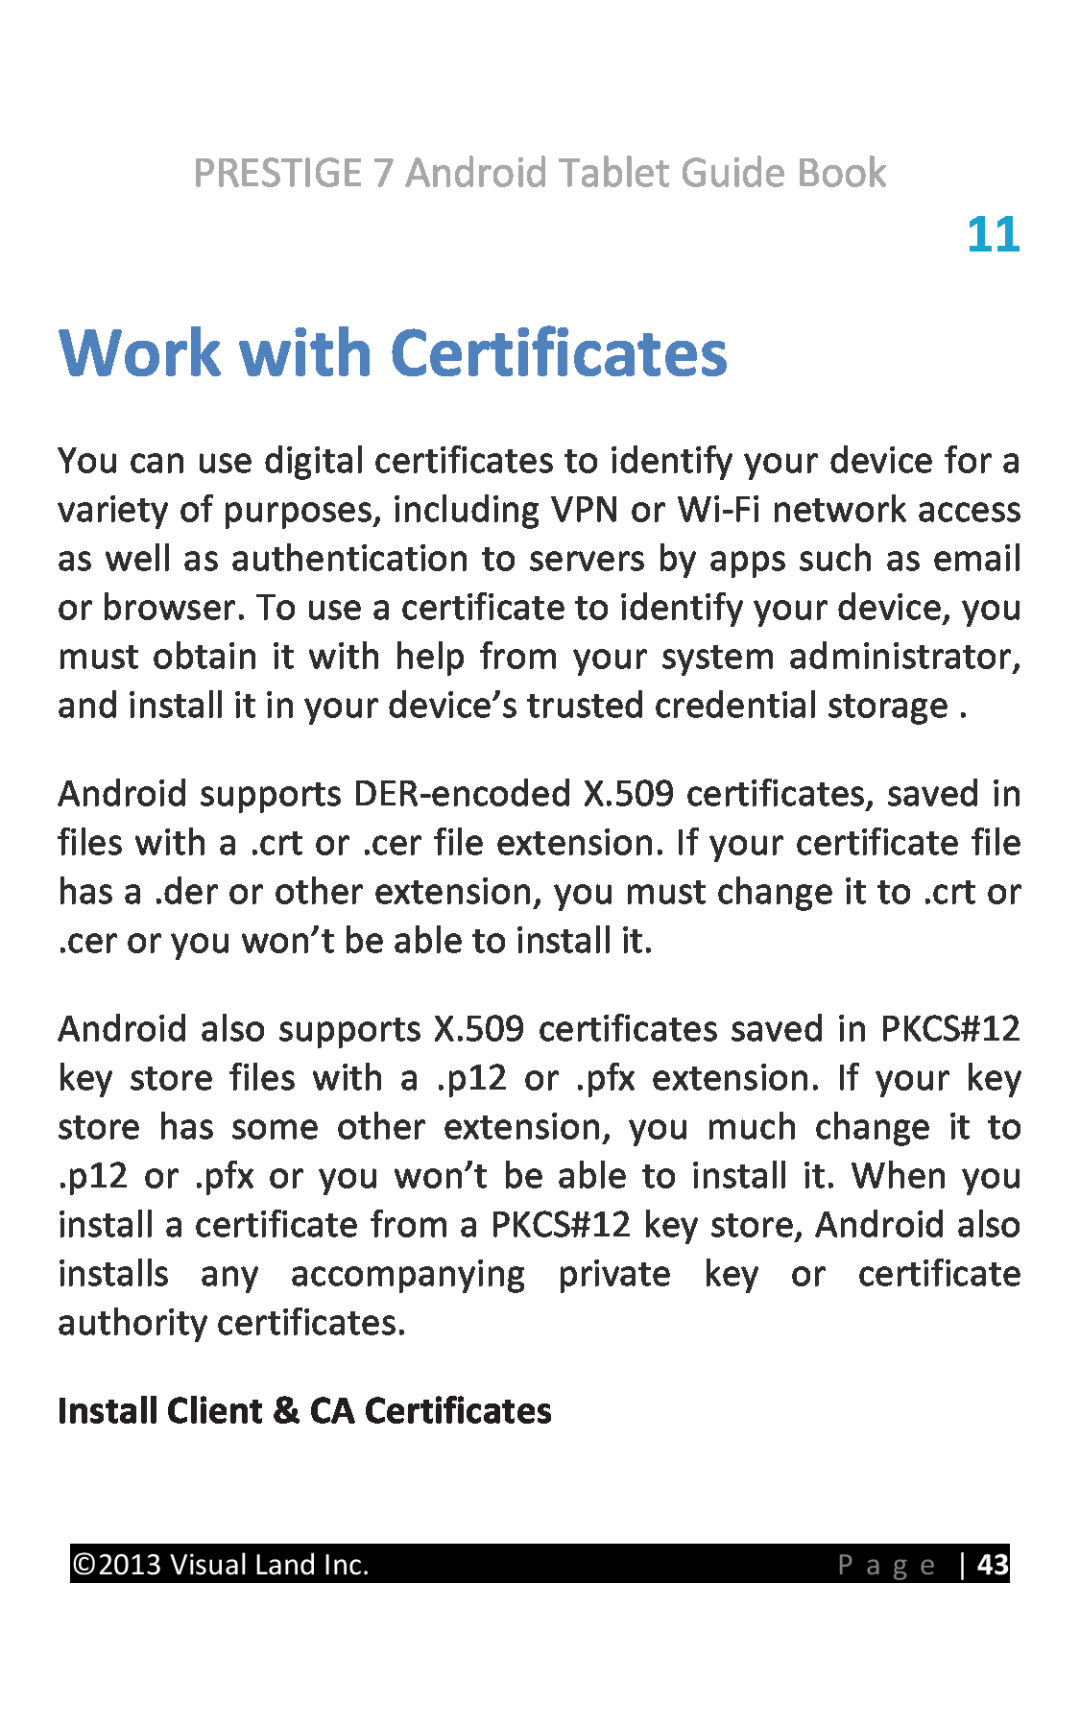 Visual Land ME-107-L-8GB-PNK, ME-107-L-8GB-BLK, ME-107-L-8GB-PRP Work with Certificates, Install Client & CA Certificates 